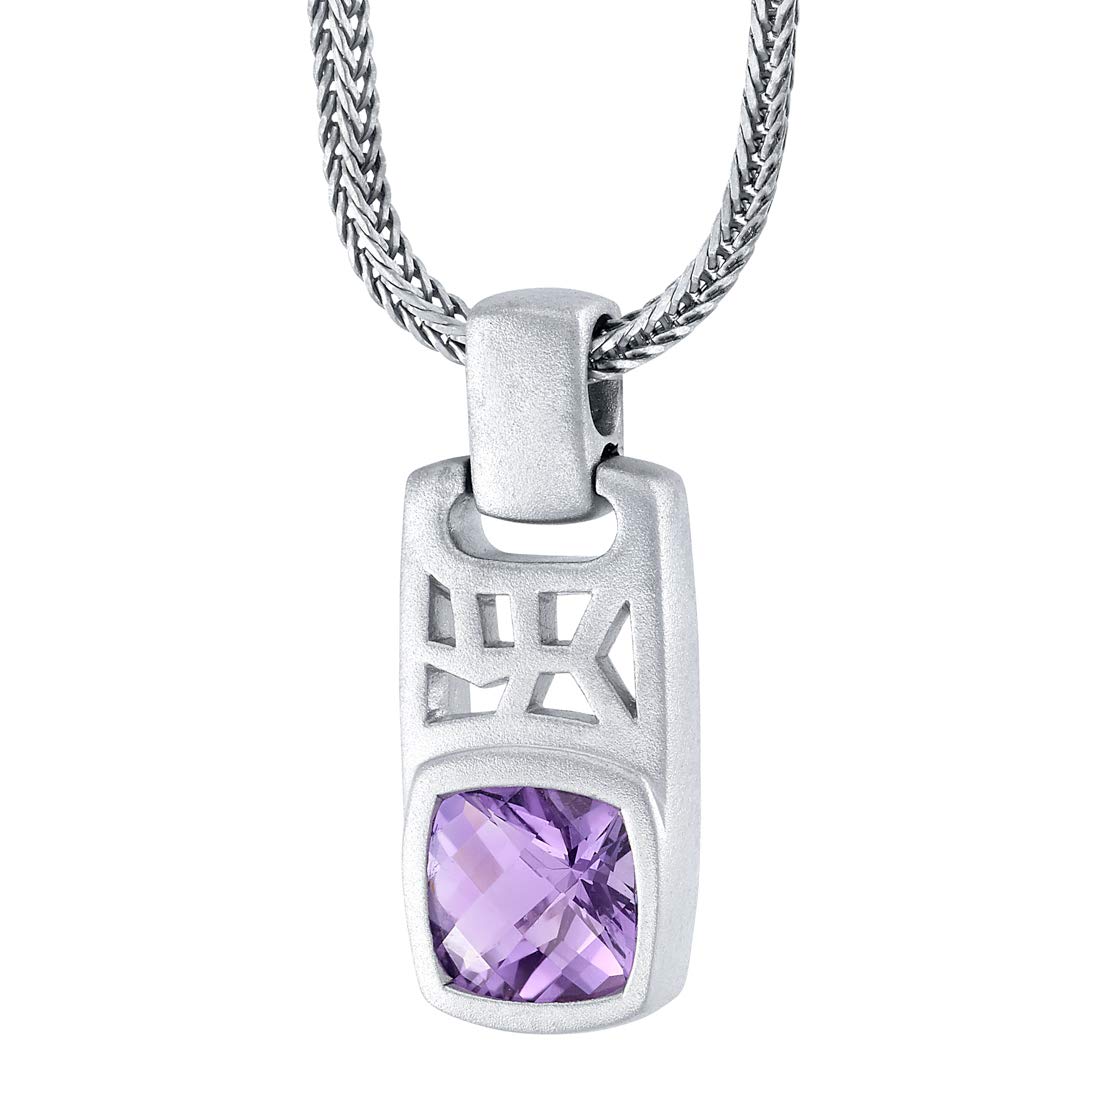 Peora Amethyst Tag Pendant Necklace for Men in Sterling Silver, 2.75 Carats Cushion Cut, Brushed Finished, with 22-Inch Italian Chain